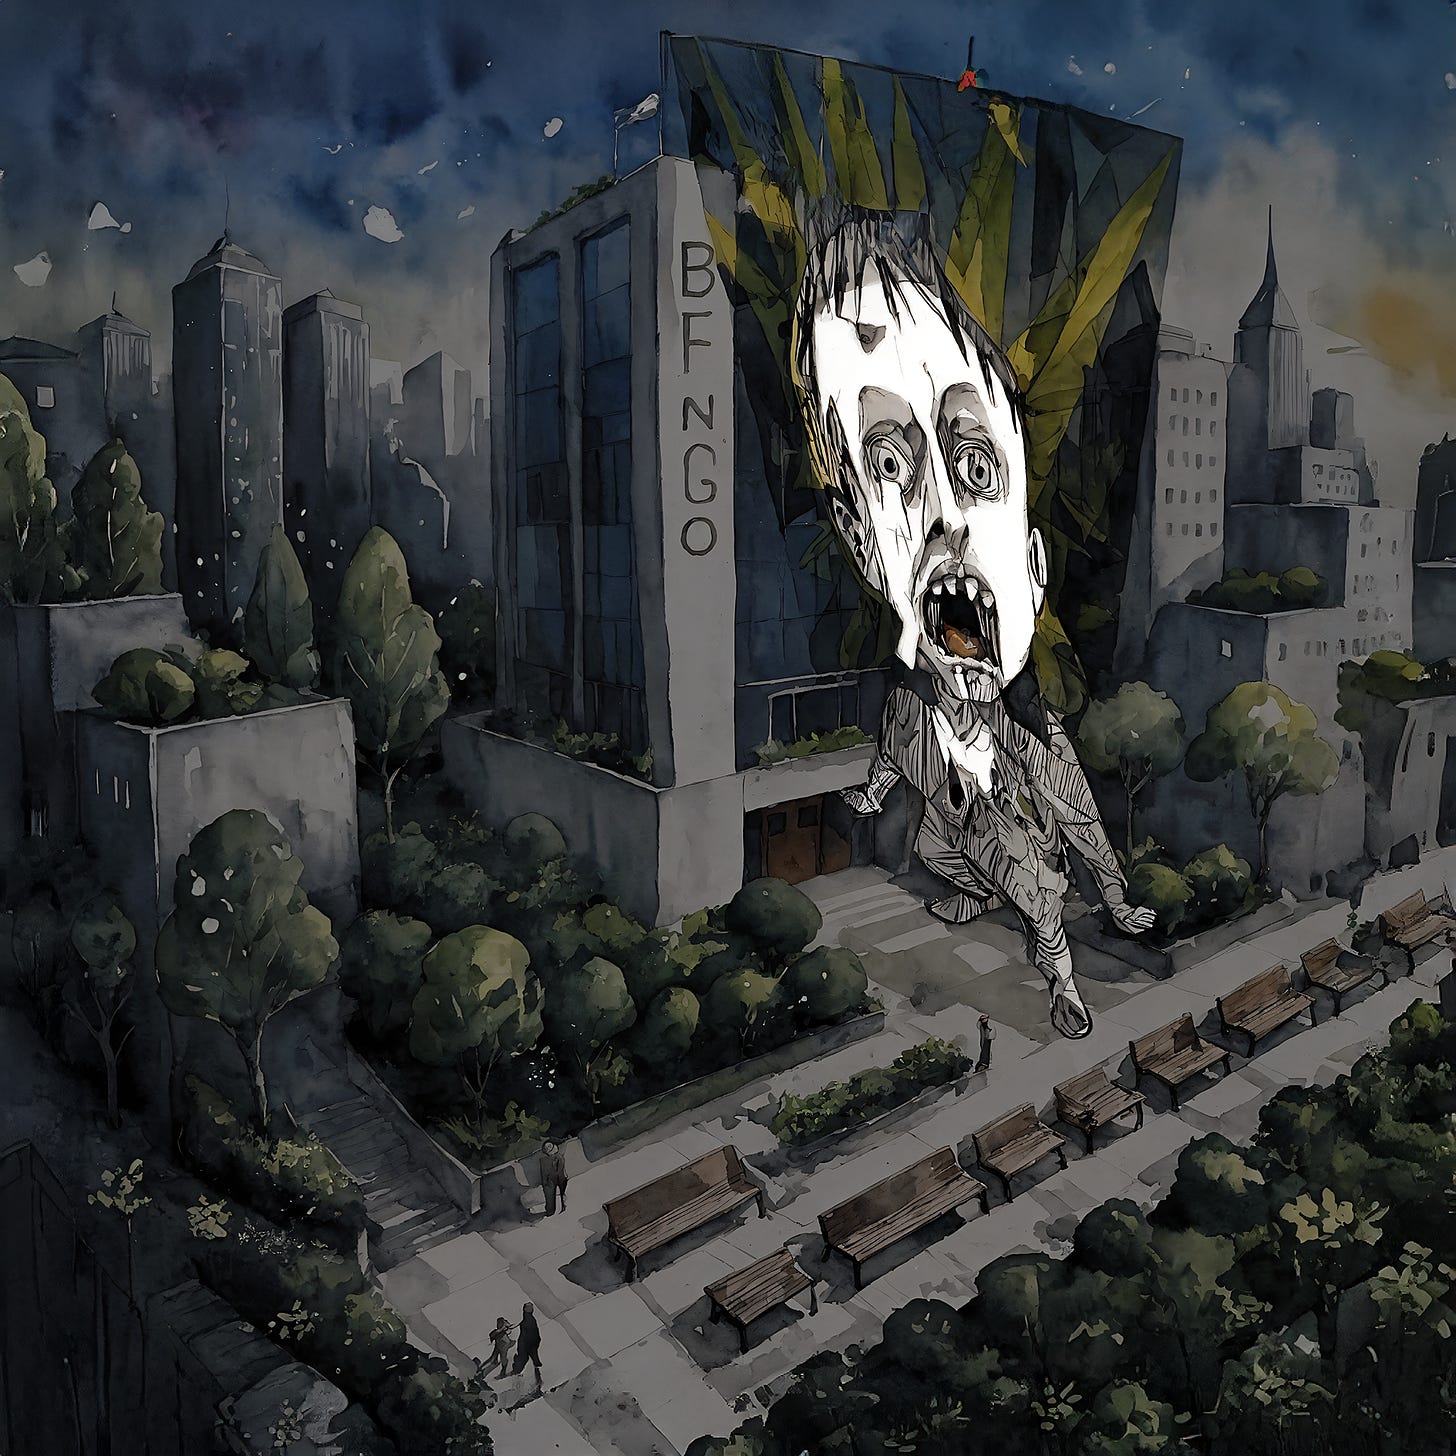 "Biggest Freaking NGO on the Planet" by Johnny Profane Au.  The image portrays a surreal cityscape at night, centered on a modern building labeled "BFNGO." A gigantic, ghostly figure with a terrified, exaggerated expression looms over the building, resembling Edvard Munch's "The Scream." This haunting figure evokes themes of stress and anxiety, paralleling the article's exploration of the emotional and sensory overload experienced in high-pressure work environments. The art style combines expressionism and gothic horror, with bold lines and a muted palette. The dramatic chiaroscuro effect highlights the figure, emphasizing the sense of overwhelming pressure. Surrounding the central figure are detailed urban elements like trees and benches, rendered in a subdued manner to maintain focus. The eerie, nightmarish atmosphere reflects the article's themes of hidden agendas, manipulation, and the struggle for authenticity in a corporate setting. The image captures the internal turmoil and exhaustion faced by neurodivergent professionals navigating socially complex environments.